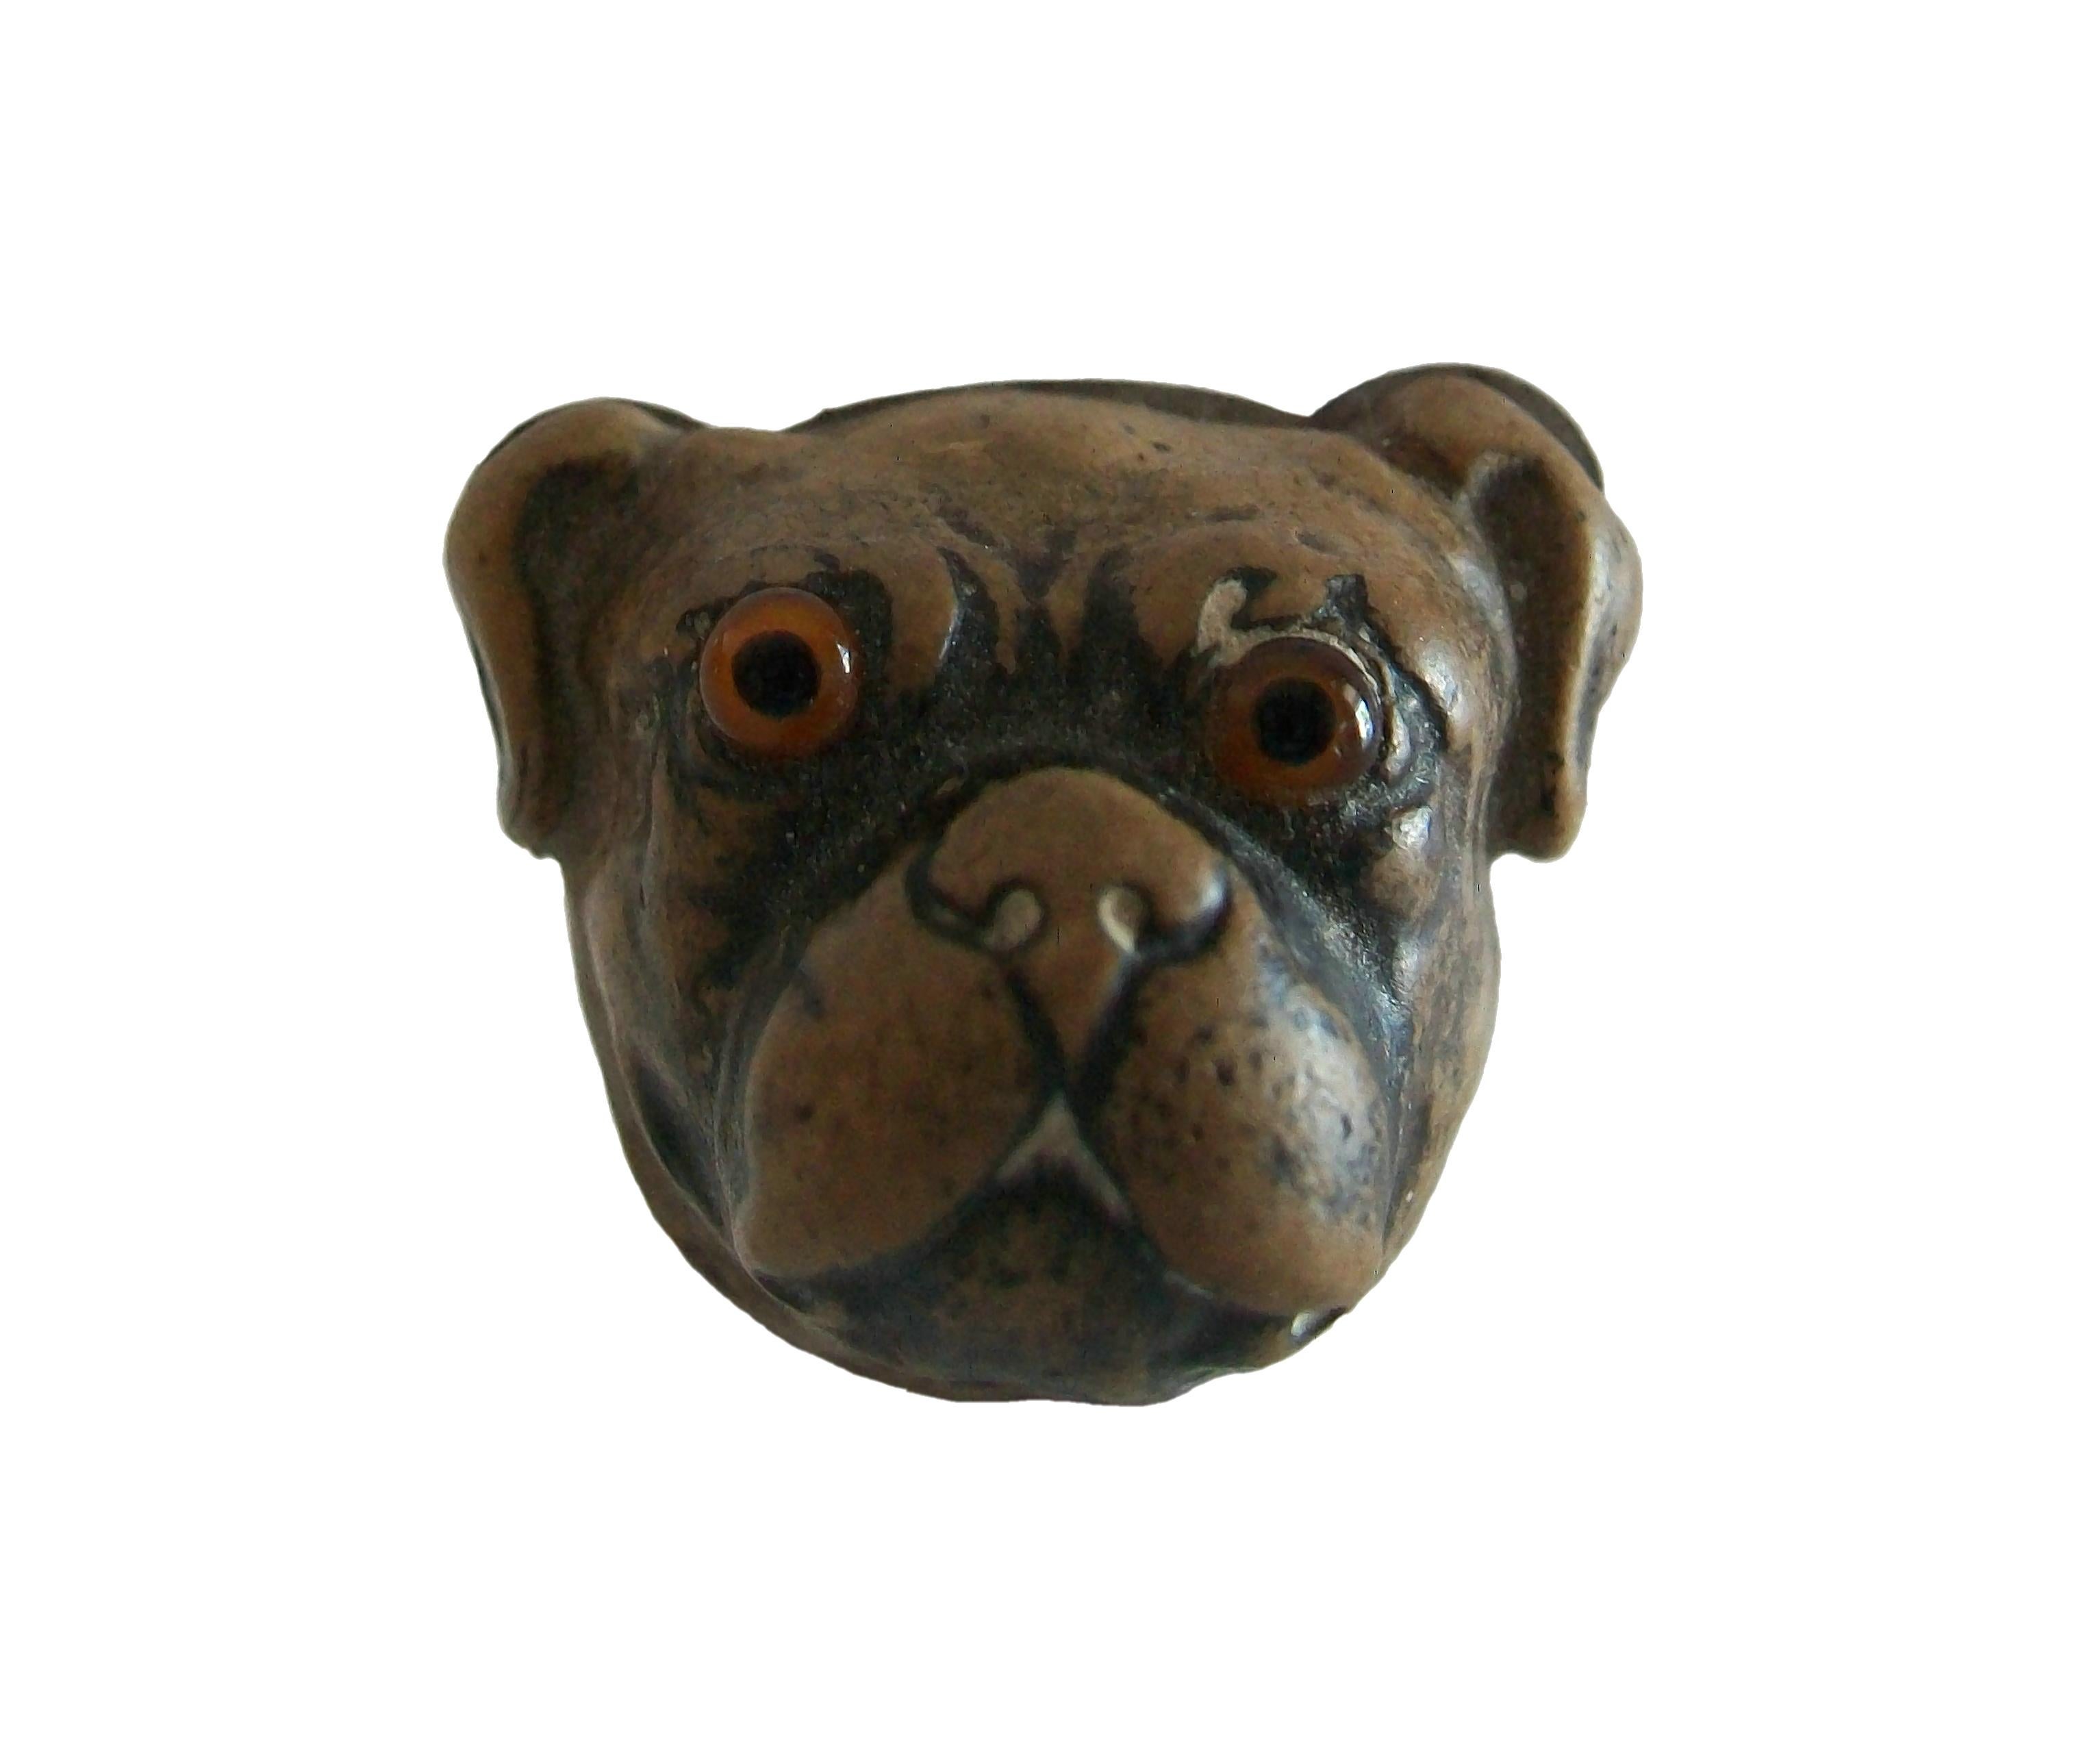 Vintage glazed ceramic 'bull dog' brooch or pin - medium size - hand made - realistically modelled and set with two glass eyes - metal back and pin - unsigned - early 20th century.

Excellent vintage condition - all original - no loss - no damage -